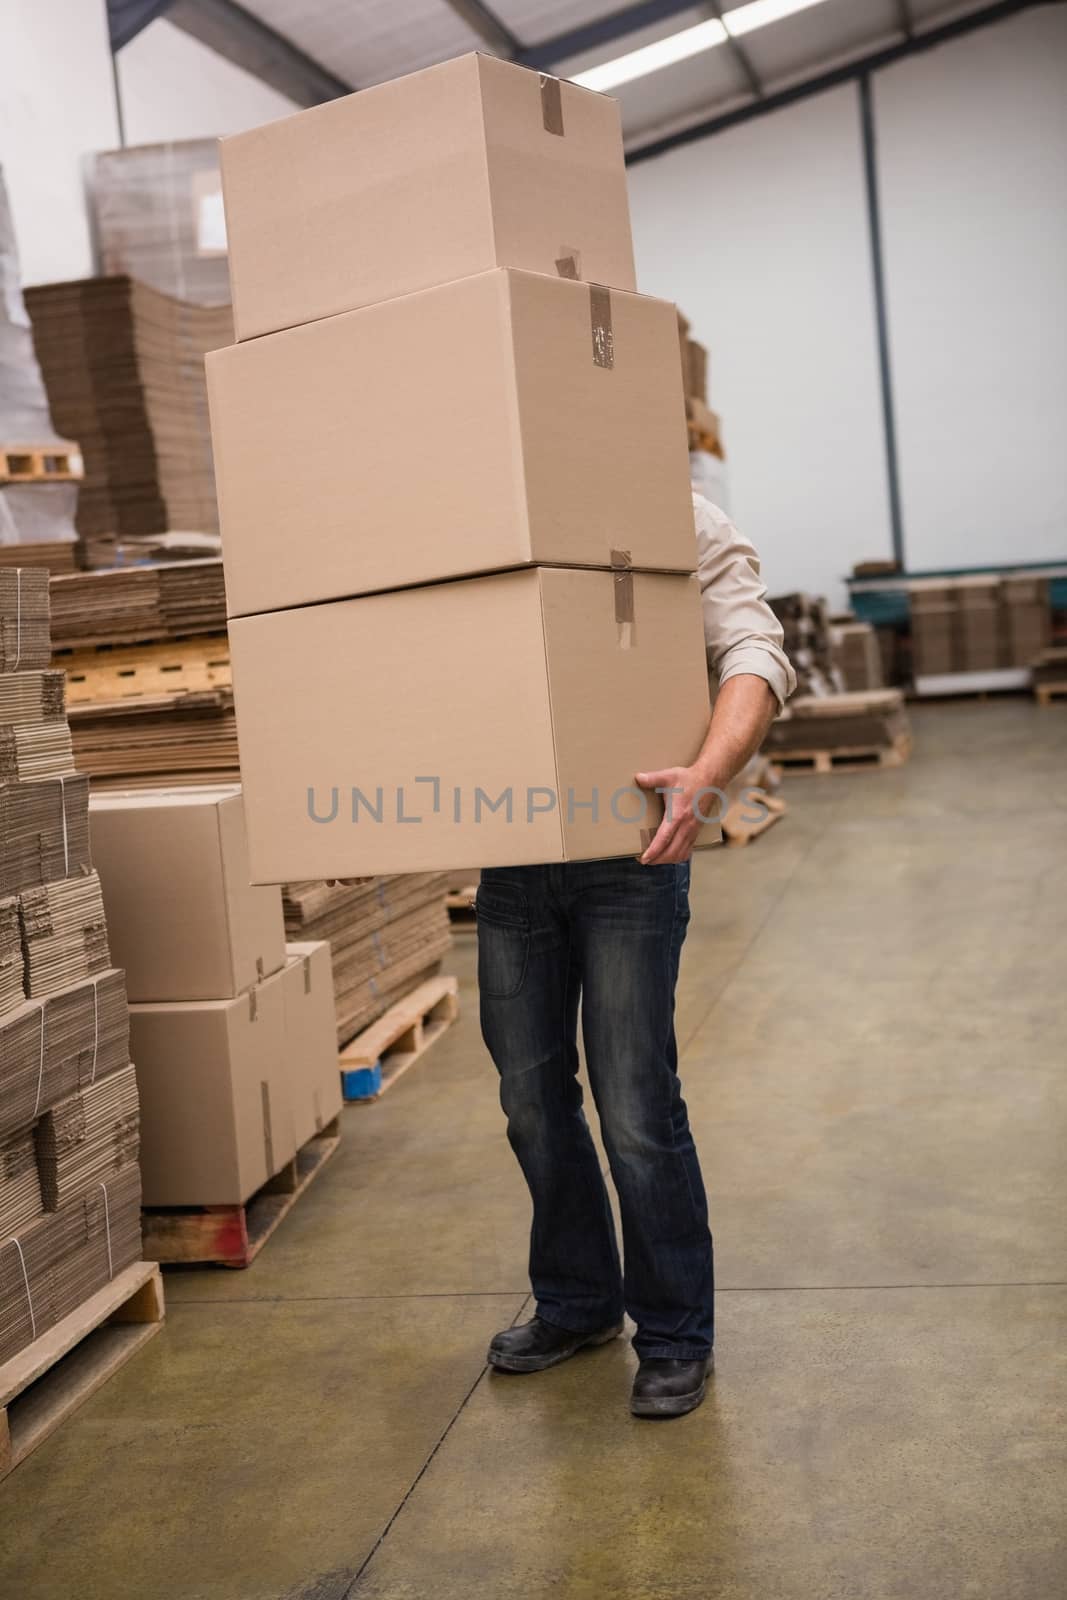 Obscured worker carrying boxes in the warehouse